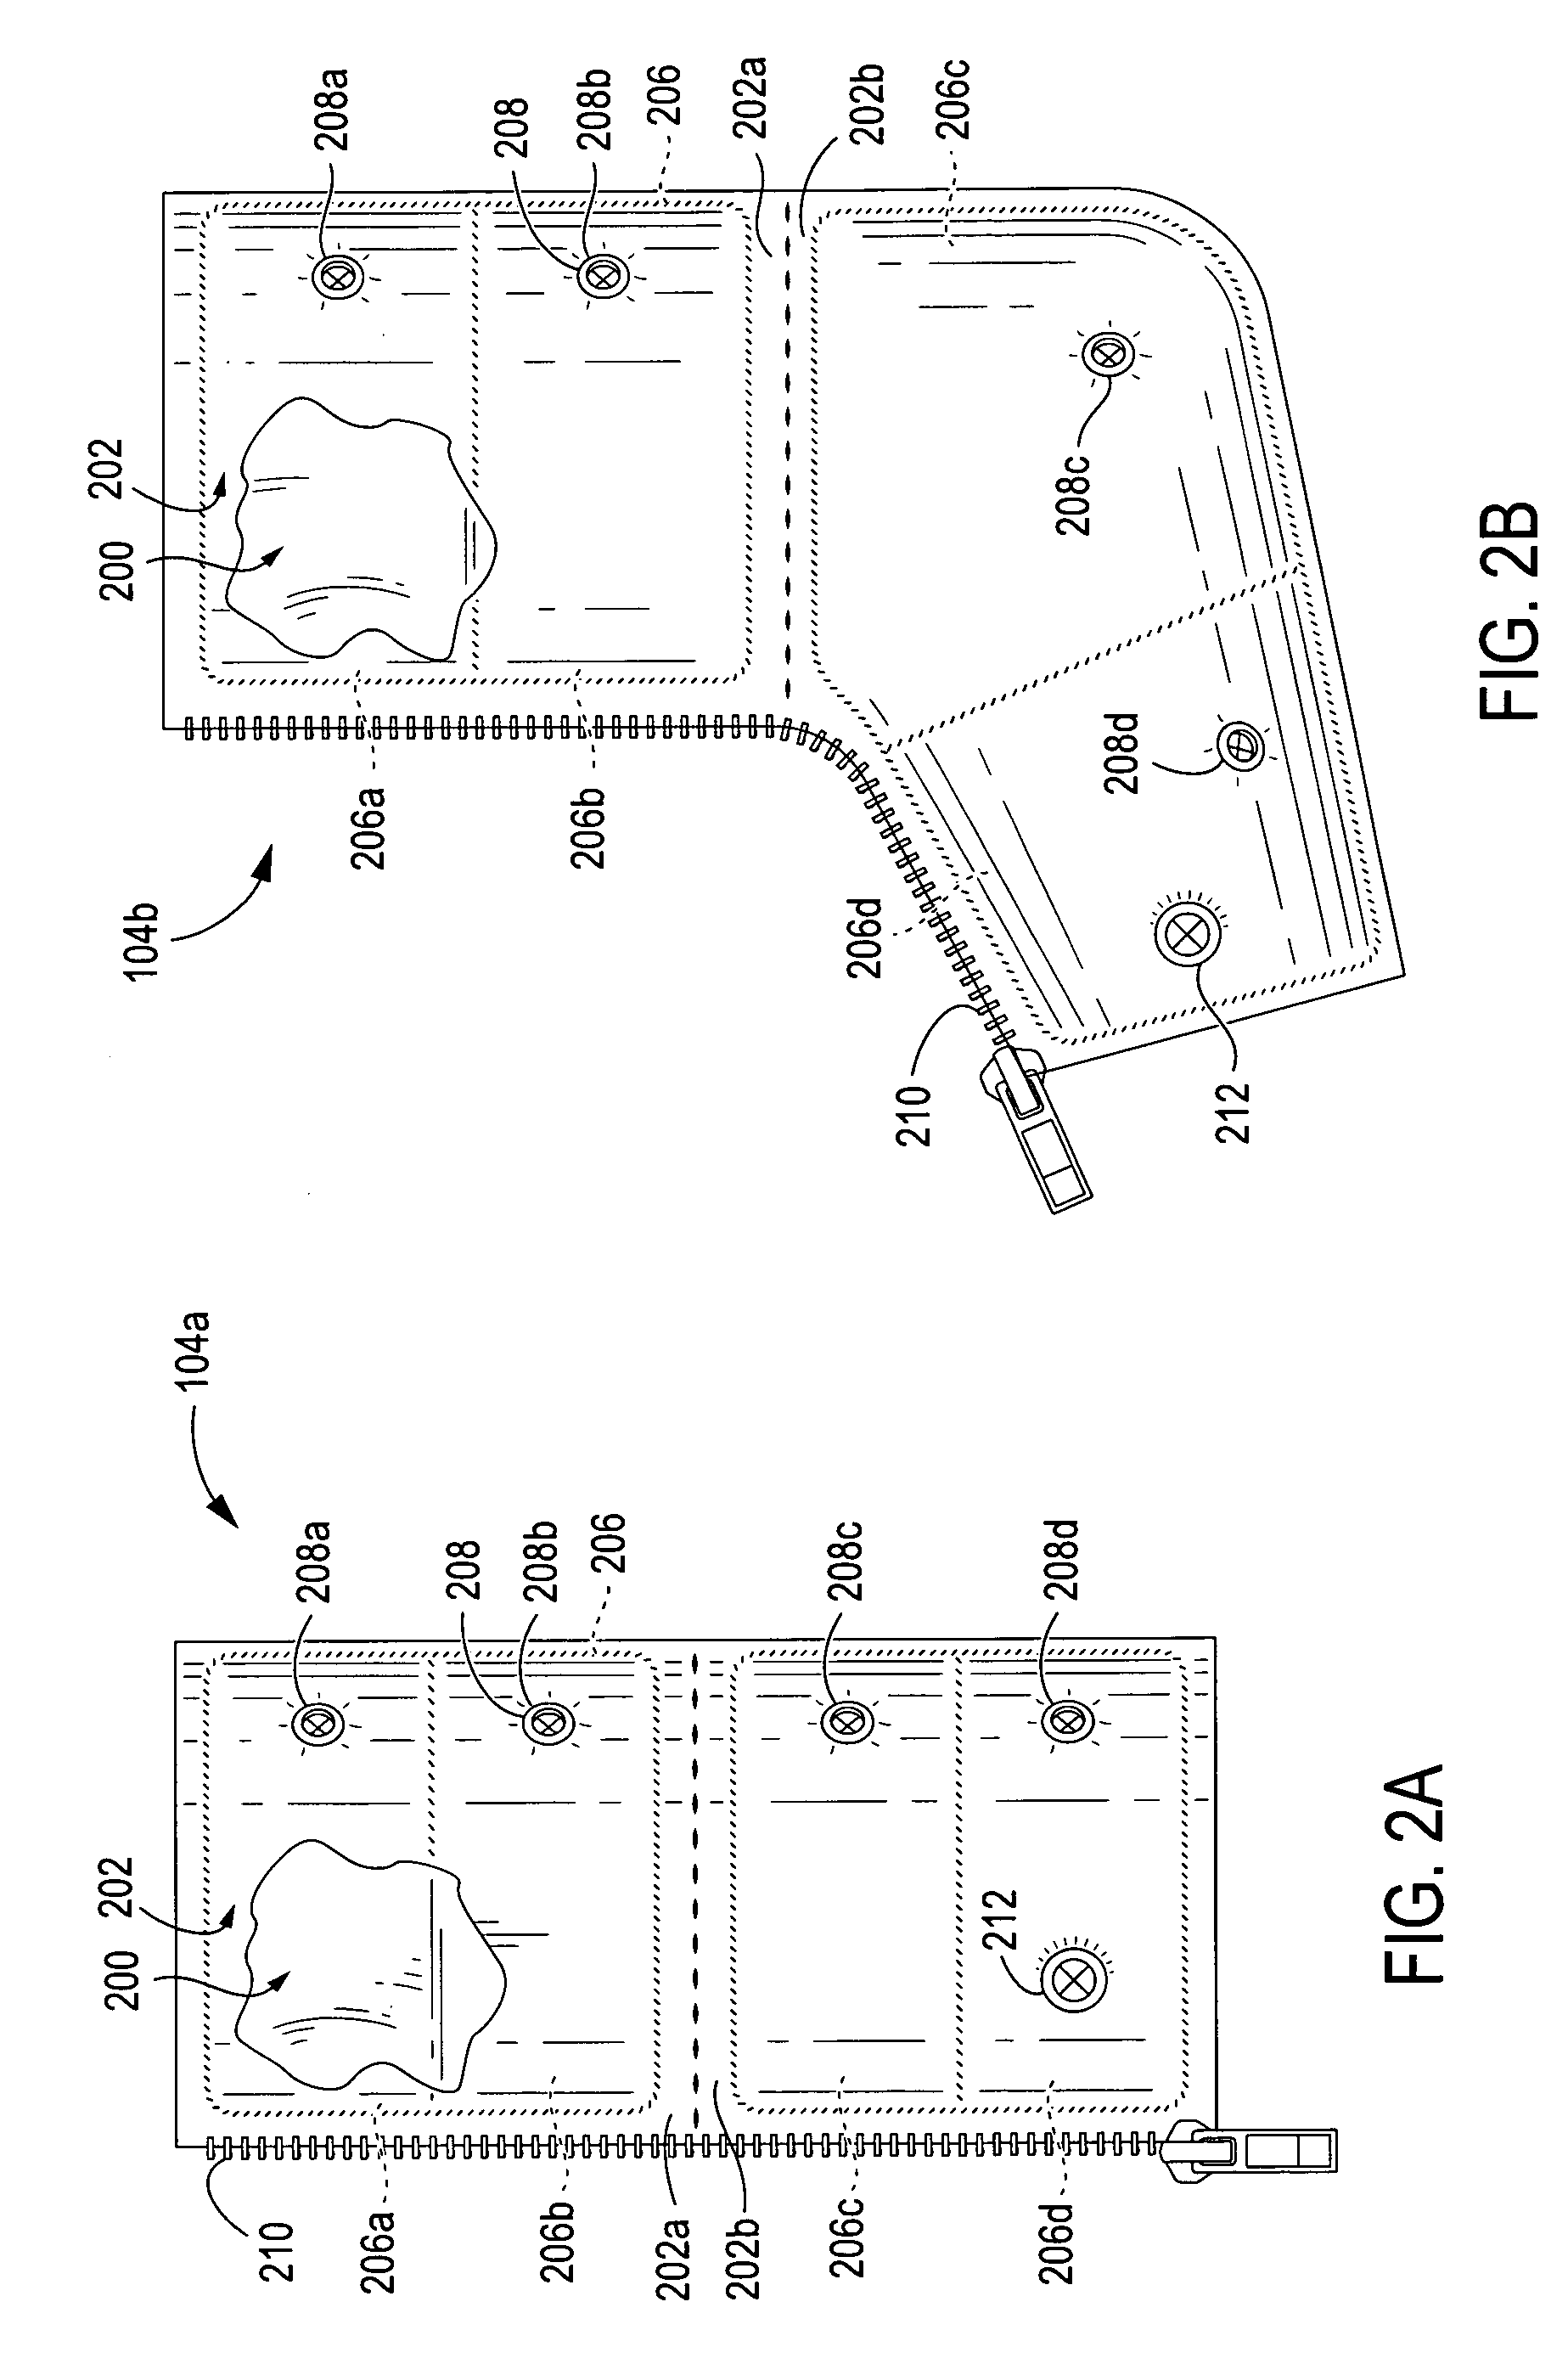 Apparatus and method for providing rapid compression to at least one appendage